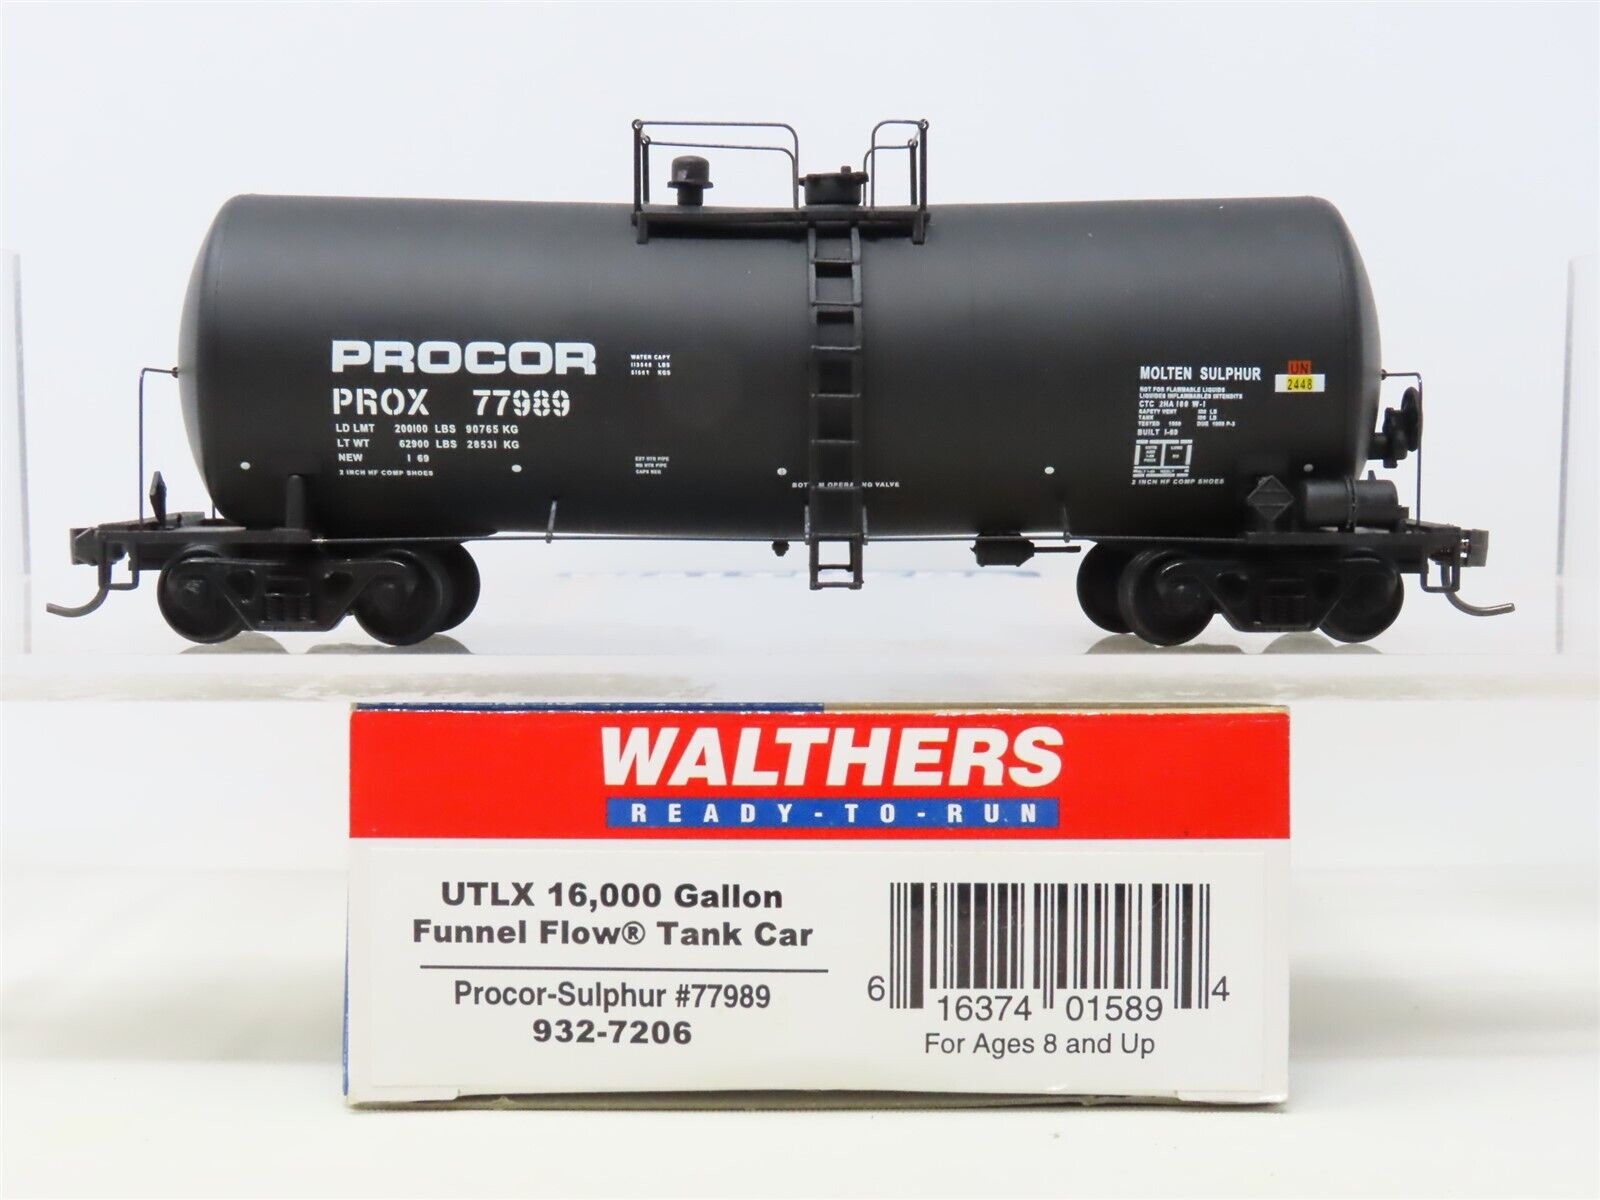 HO Scale Walthers 932-7206 PROX Procor Funnel Flow Tank Car #77989